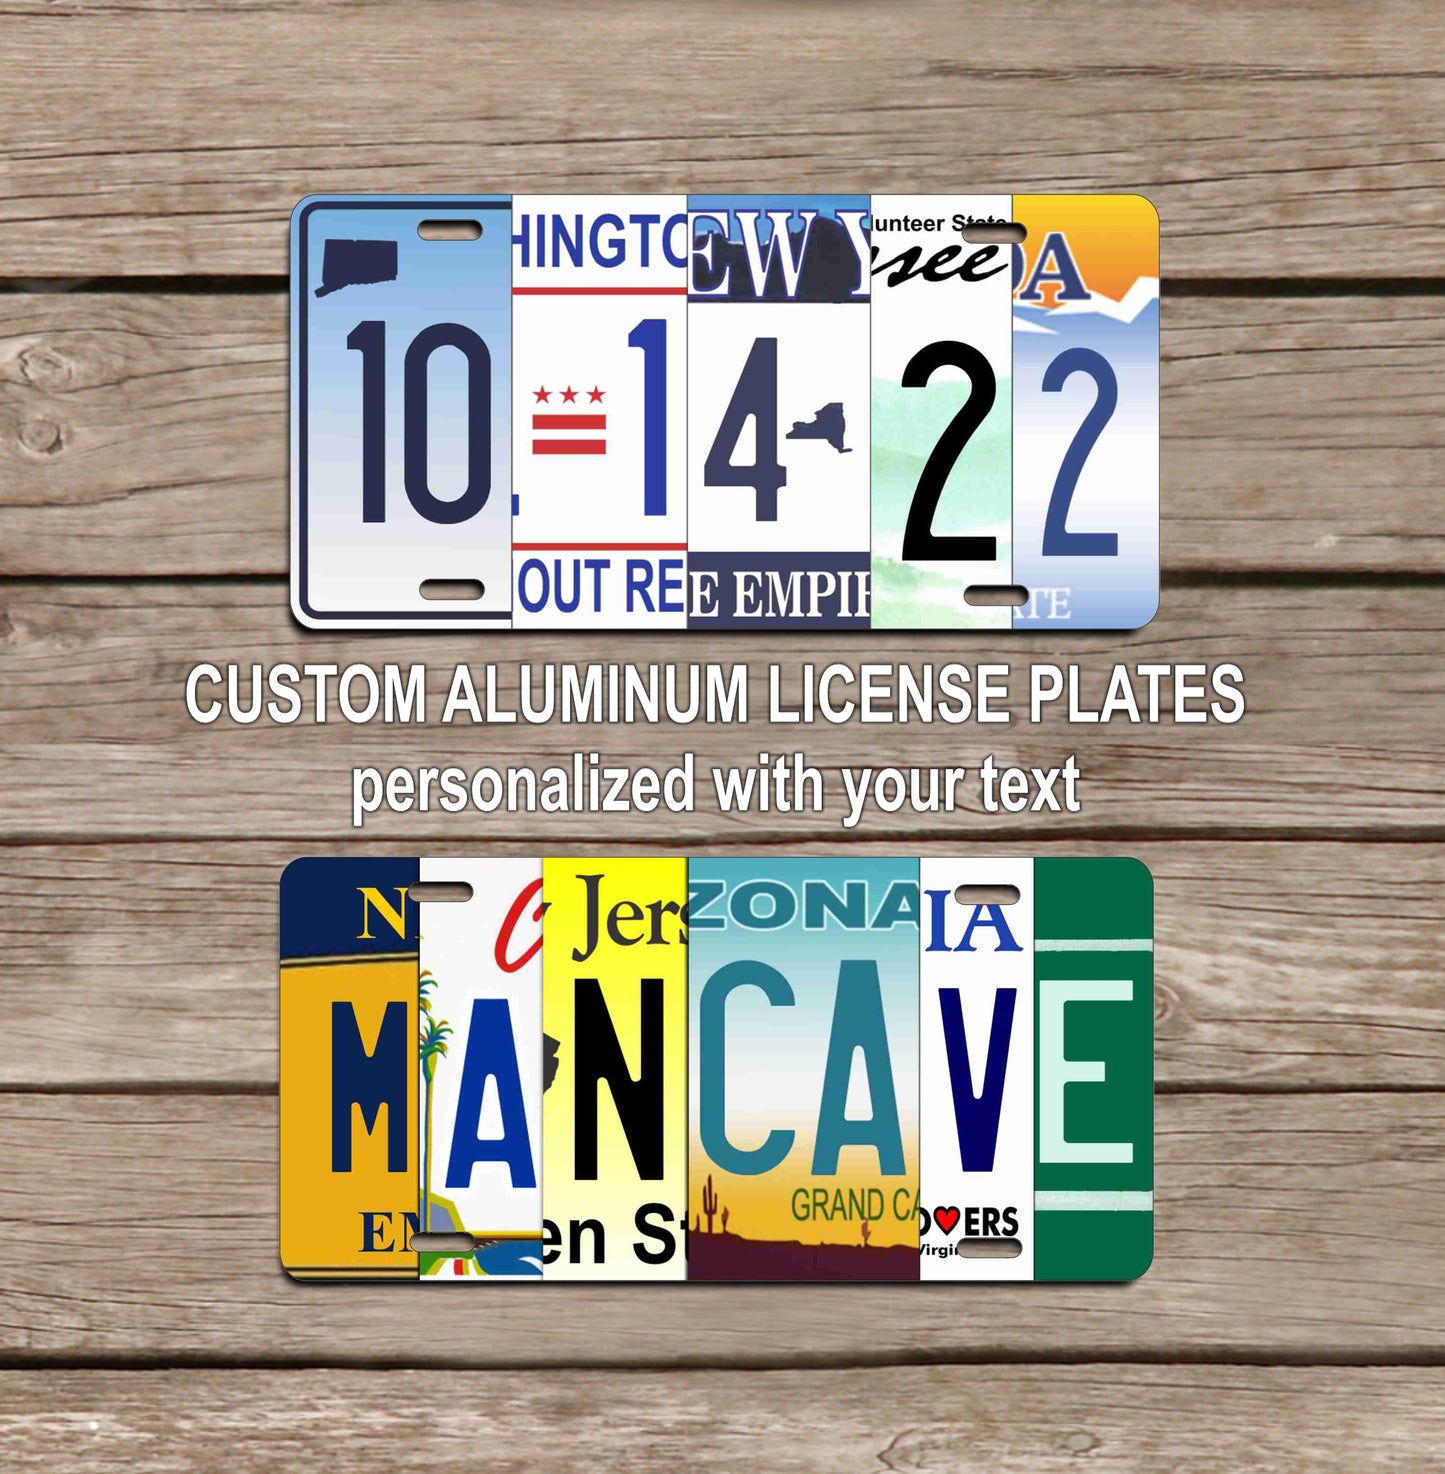 Personalized Custom license plate aluminum sign looks like a collection of state license plates